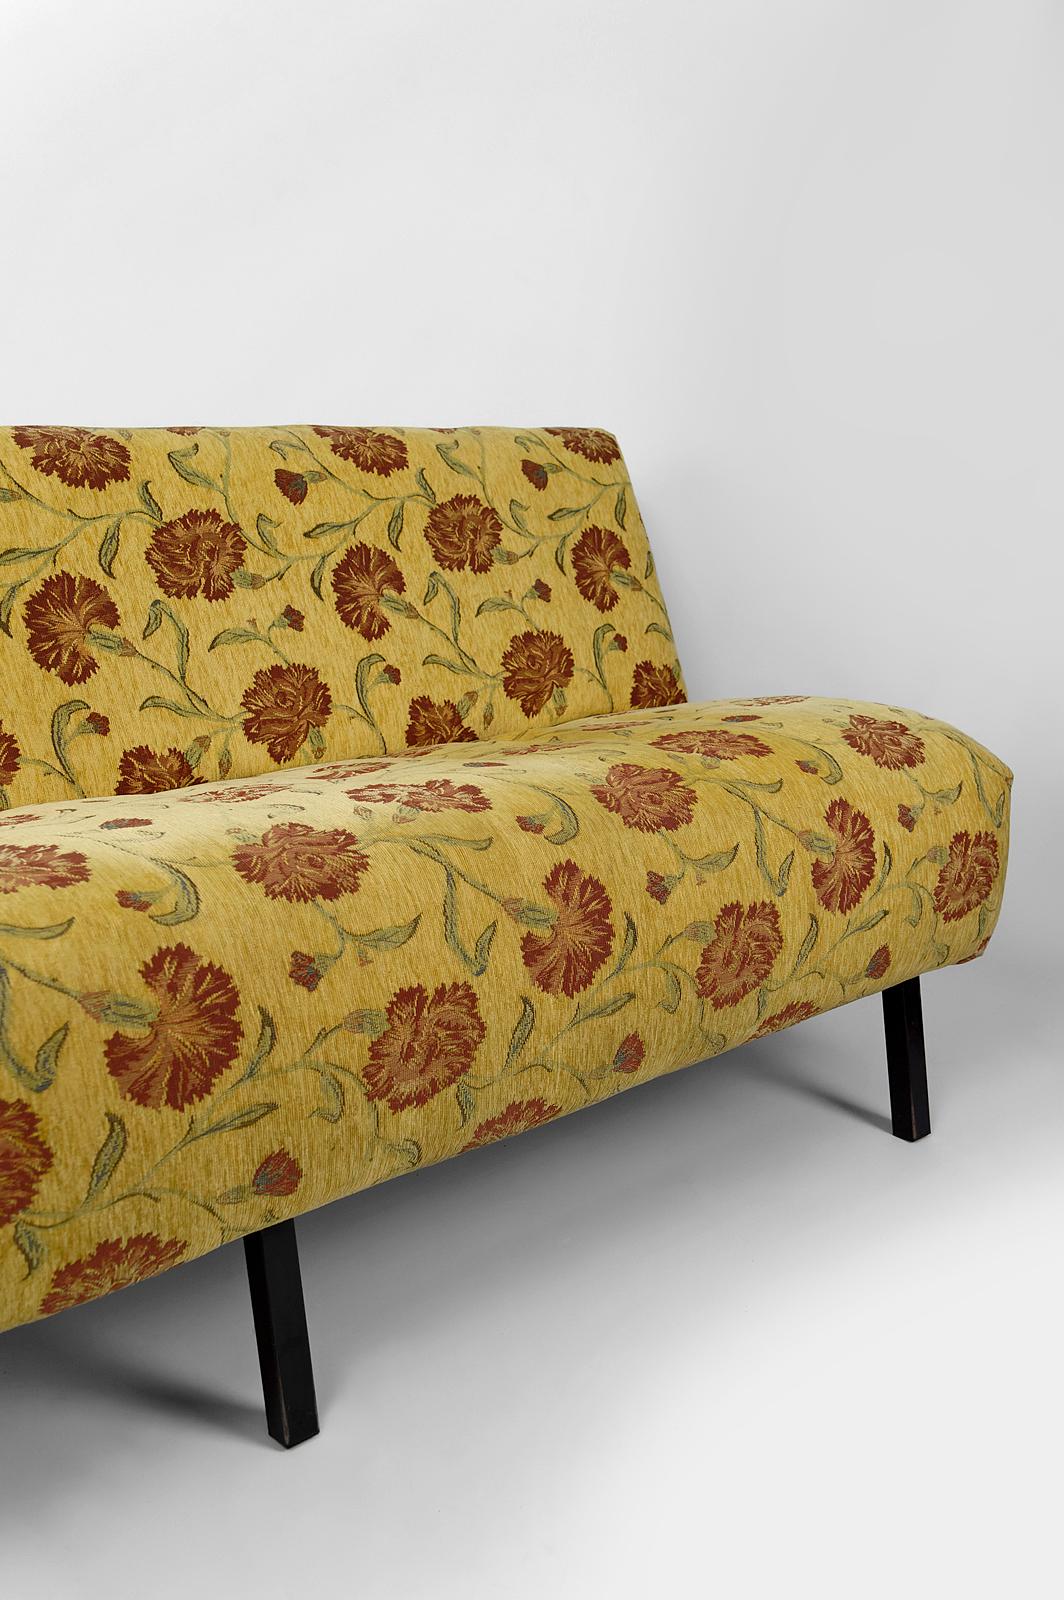 Vintage Boho sofa with yellow and red floral fabric, France, Circa 1960 For Sale 4